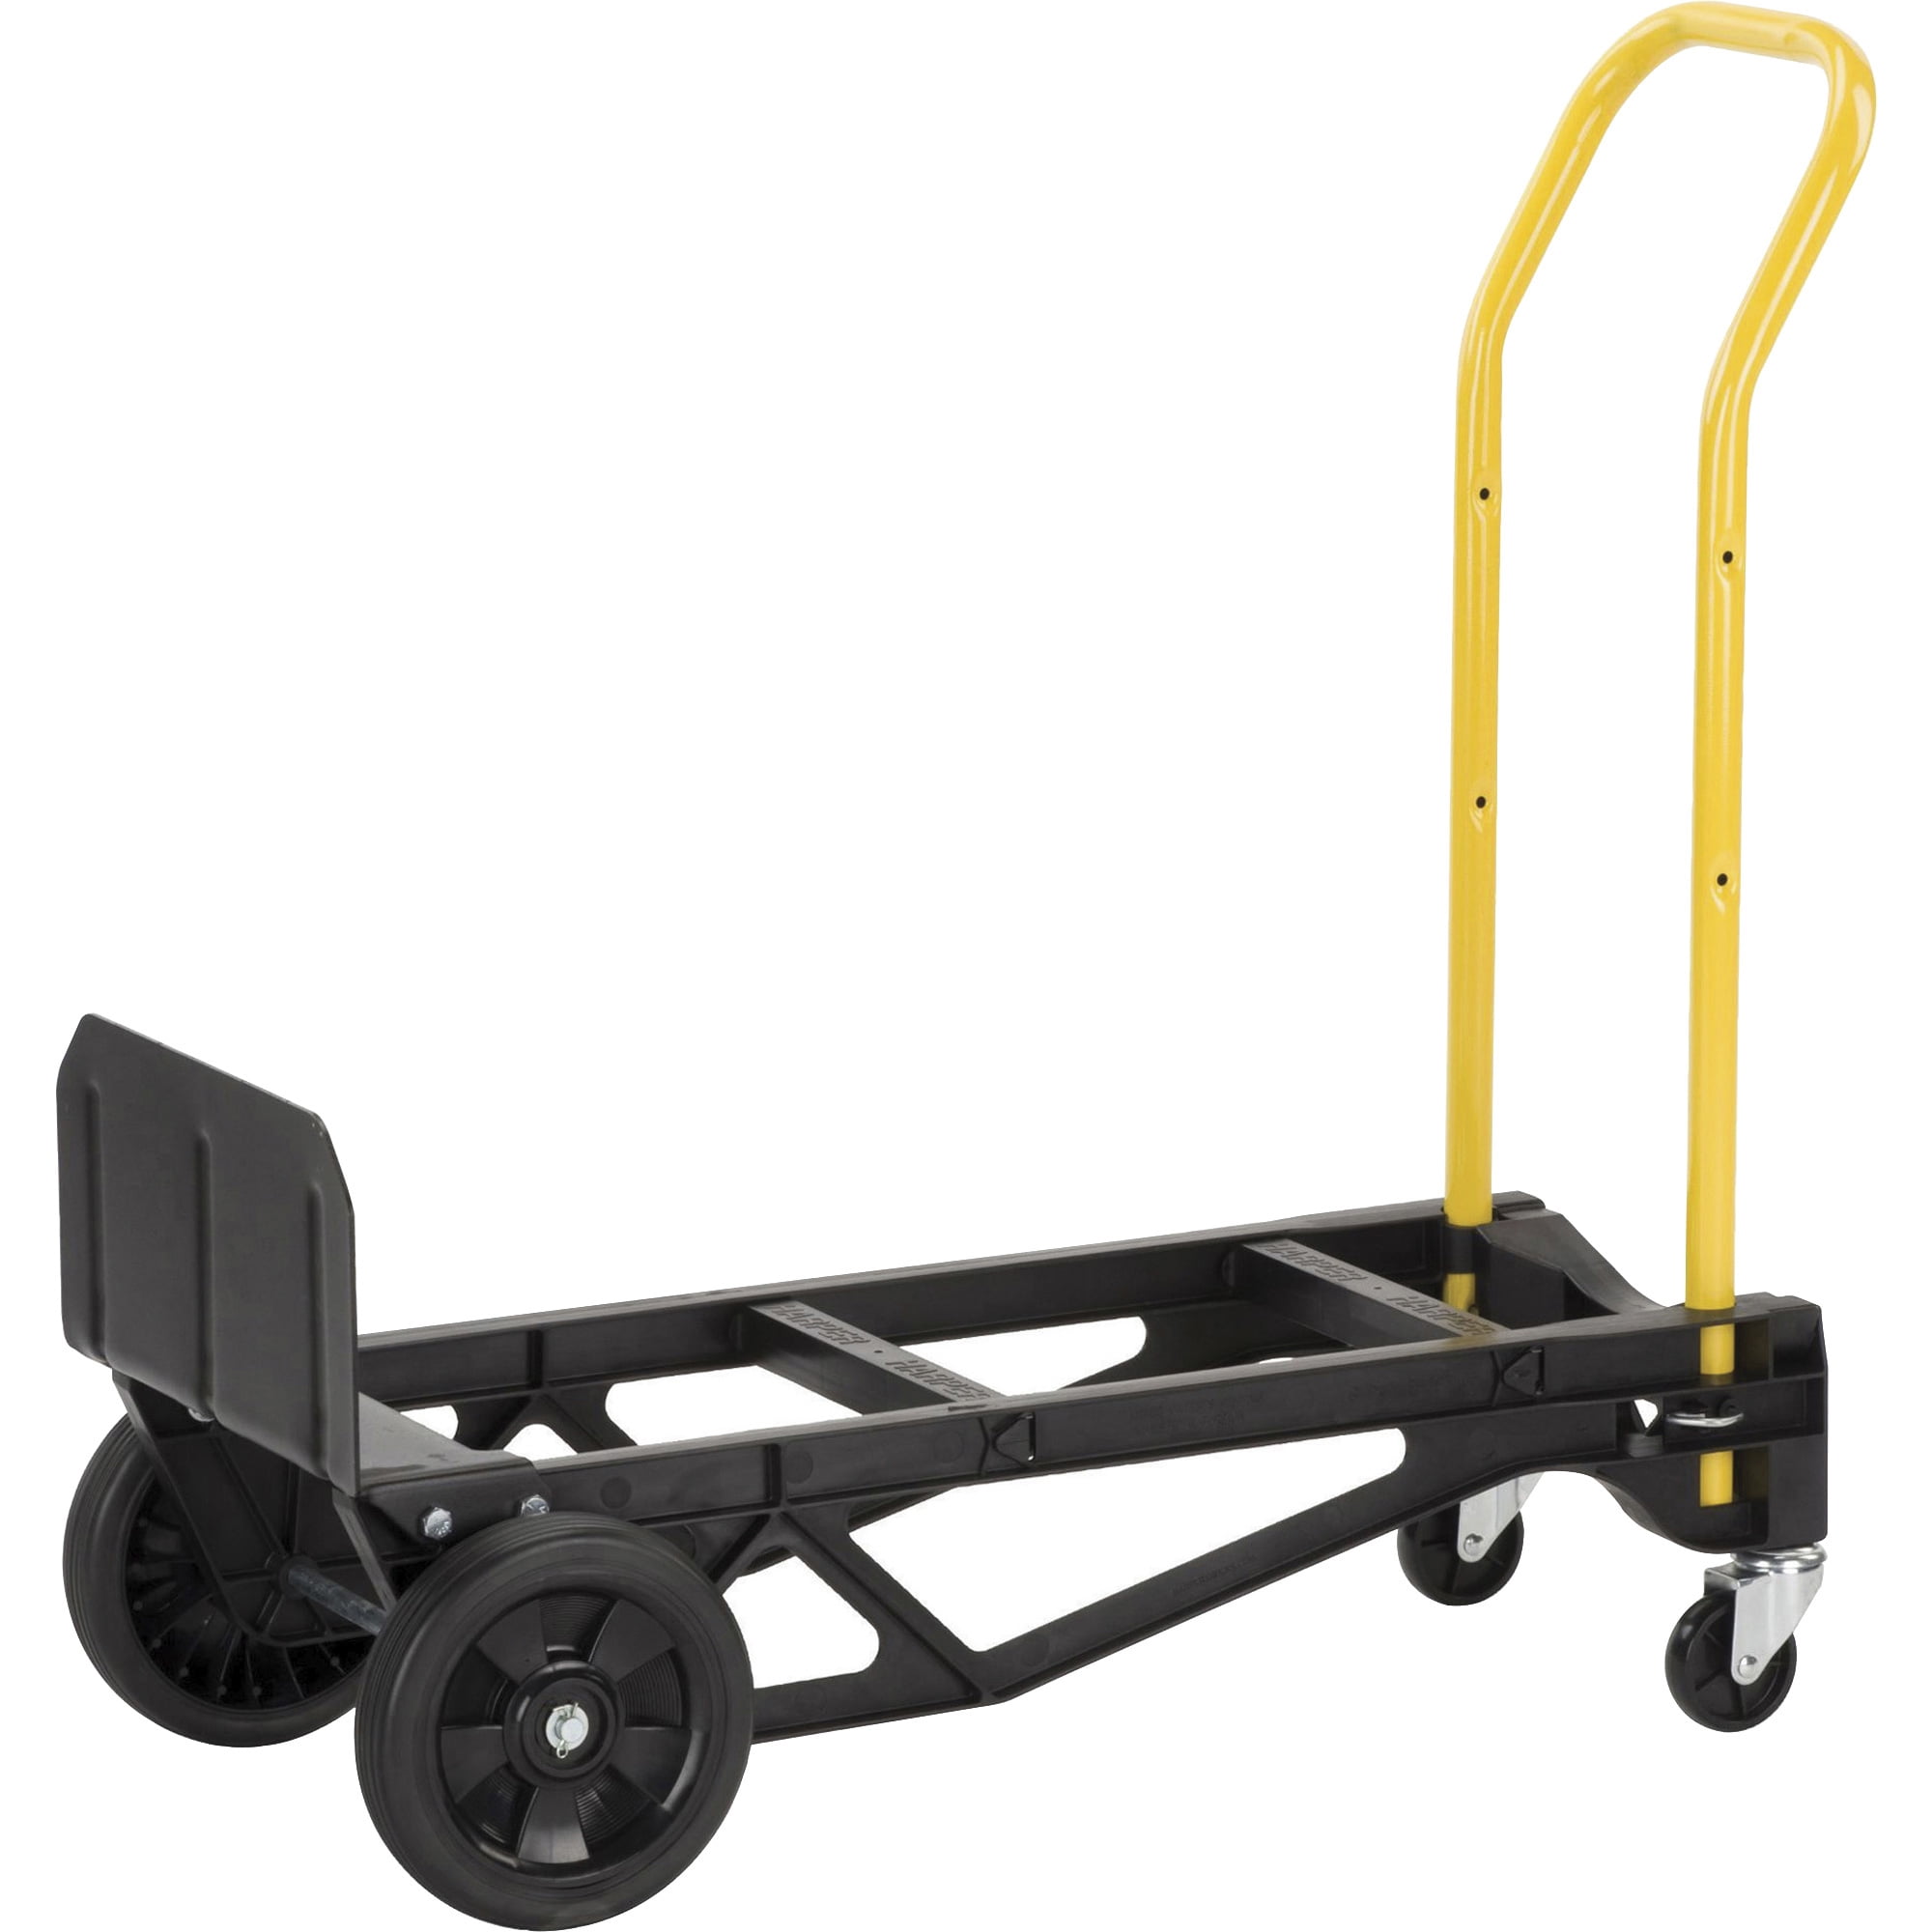 2 In 1 Convertible Hand Truck Dolly Steel 400 Lbs Capacity Swivel Casters Green 